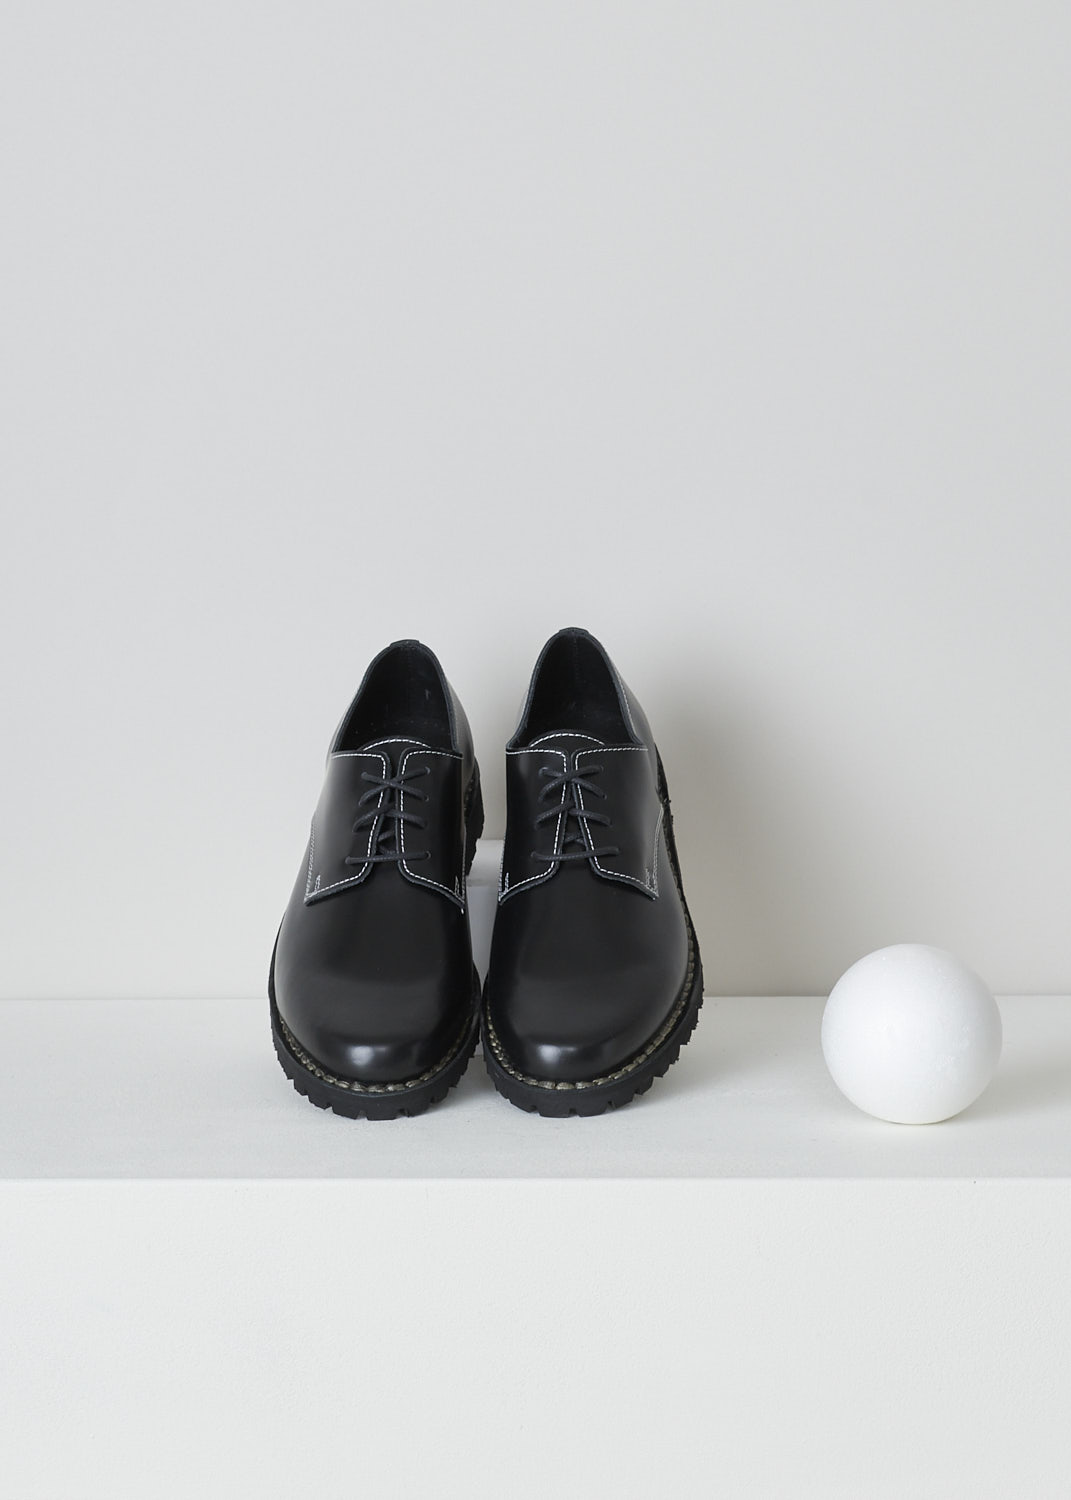 SOFIE Dâ€™HOORE, BLACK DERBY SHOES WITH WHITE STITCHING, FILOS_LJAZ_BLACK,  Black, Top, These black leather derby shoes have a round nose and a classic lace-up closing with black laces. Contrasting white stitching is used throughout. The shoes have sturdy Vibram soles. 
